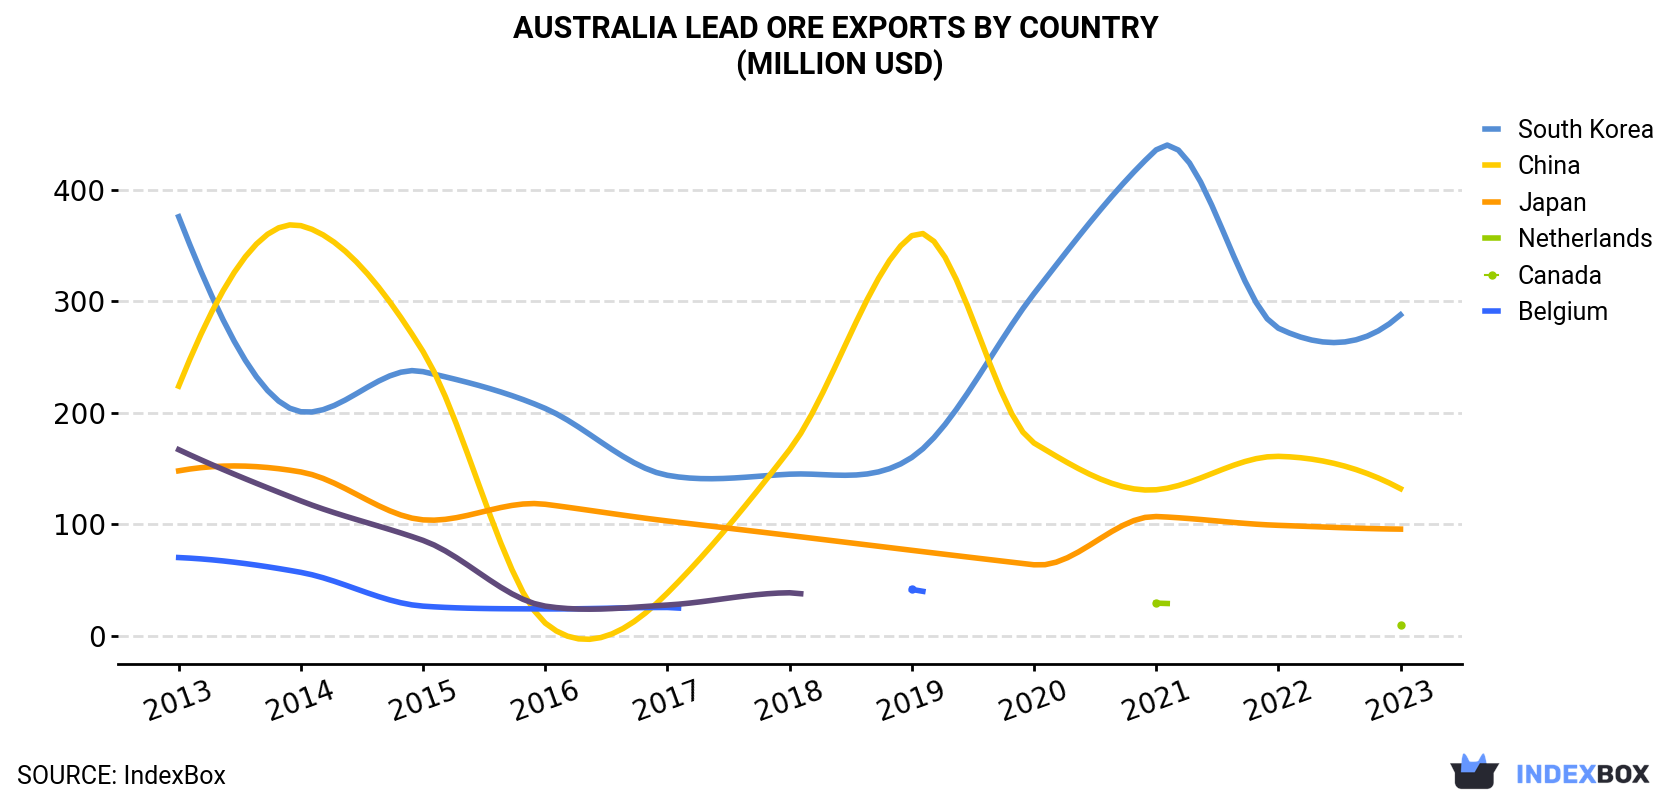 Australia Lead Ore Exports By Country (Million USD)